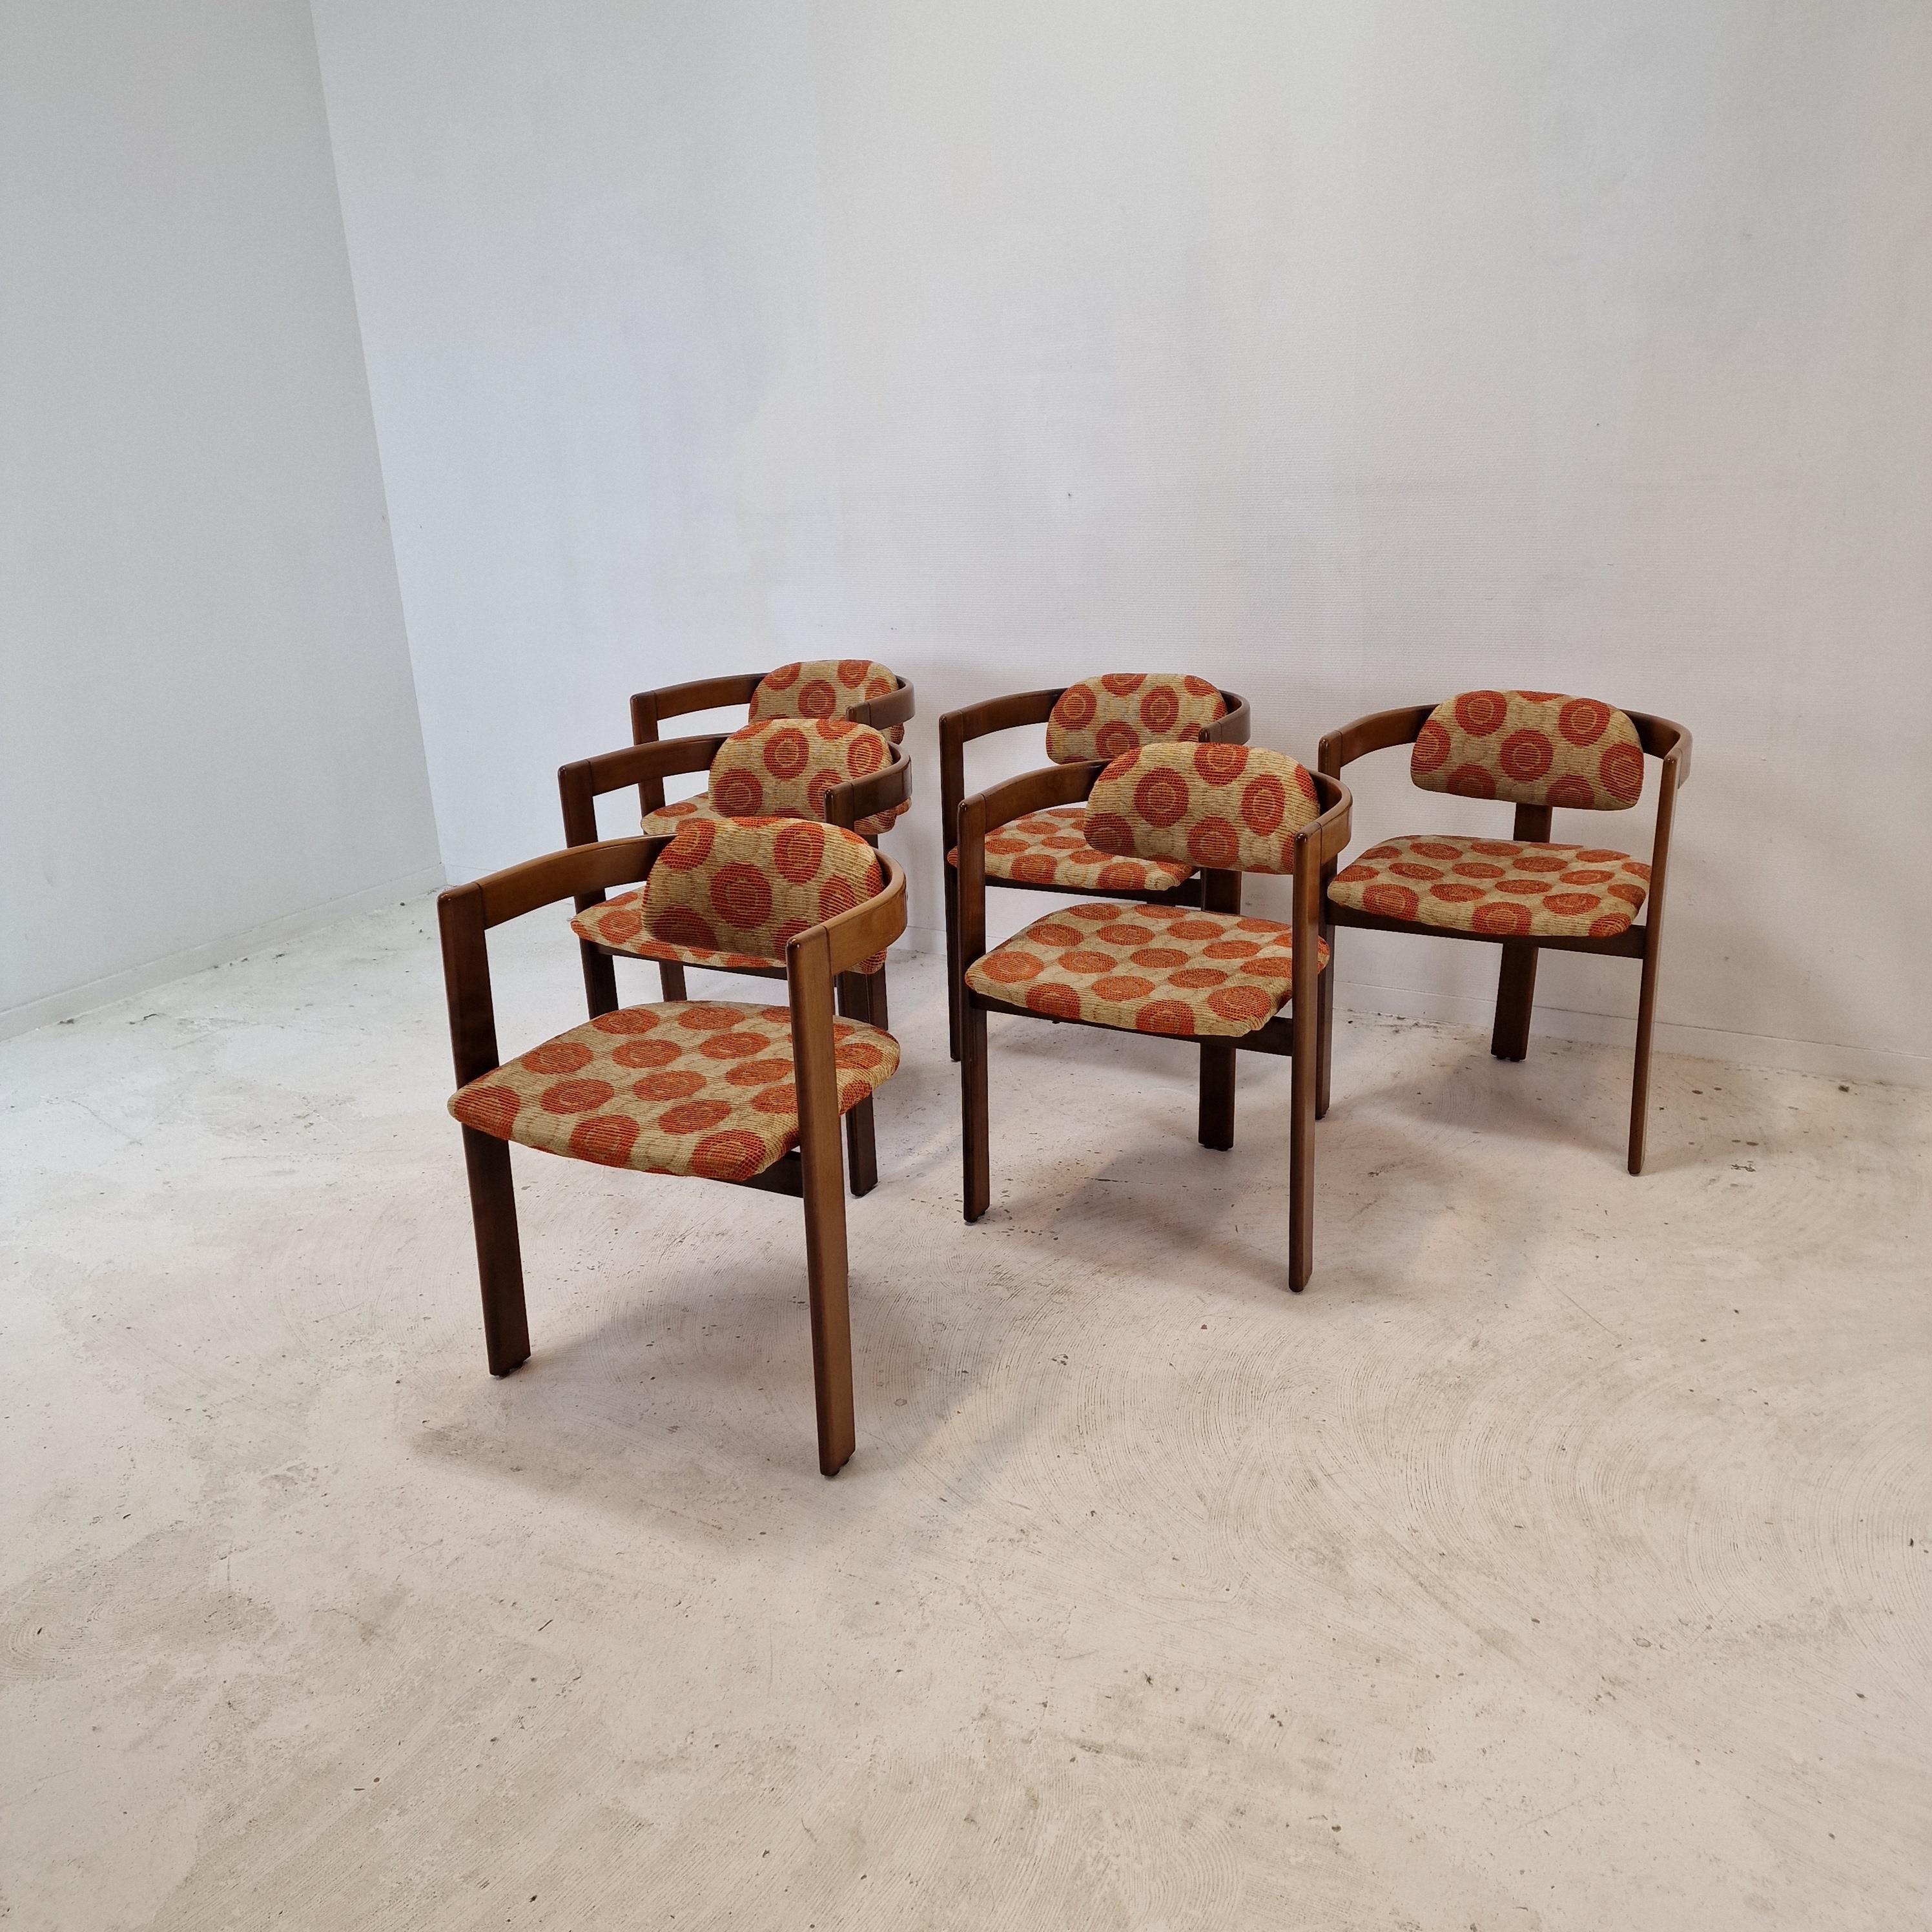 Midcentury Set of 6 Italian Wooden Armchairs, 1960's For Sale 2